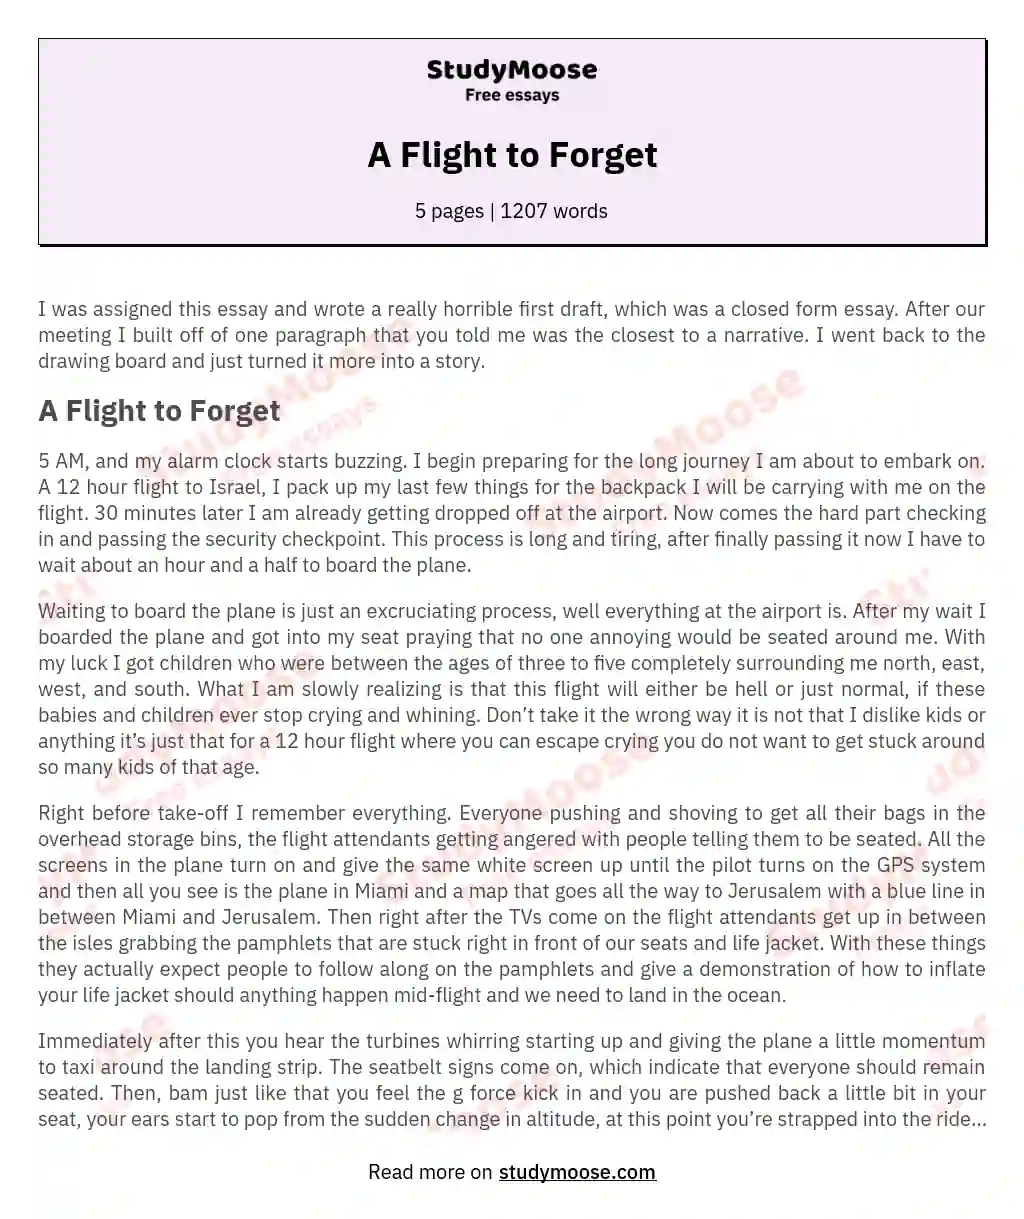 A Flight to Forget essay